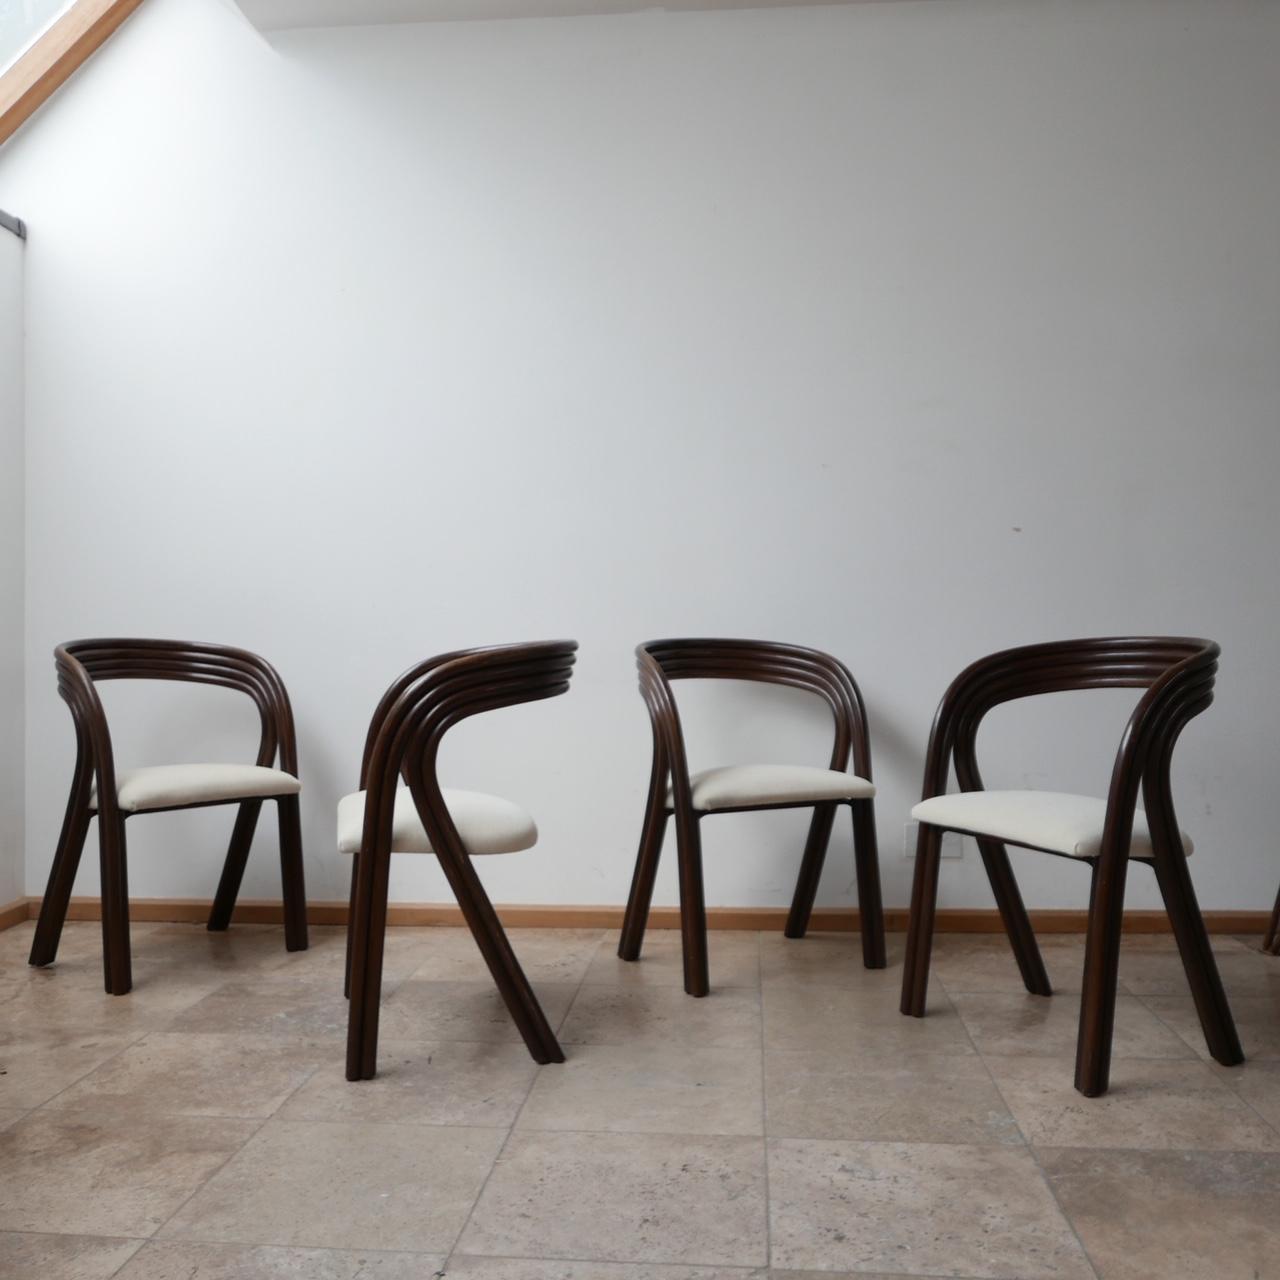 A set of four stylish dining chairs by Axel Enthoven for Rohé. 

Holland, c1970s. 

Steam bent wood. 

Upholstered in a neutral fabric. 

Location: London Gallery. 

Dimensions: 53 W x 42 D x 45 seat height x 77 total height in cm.